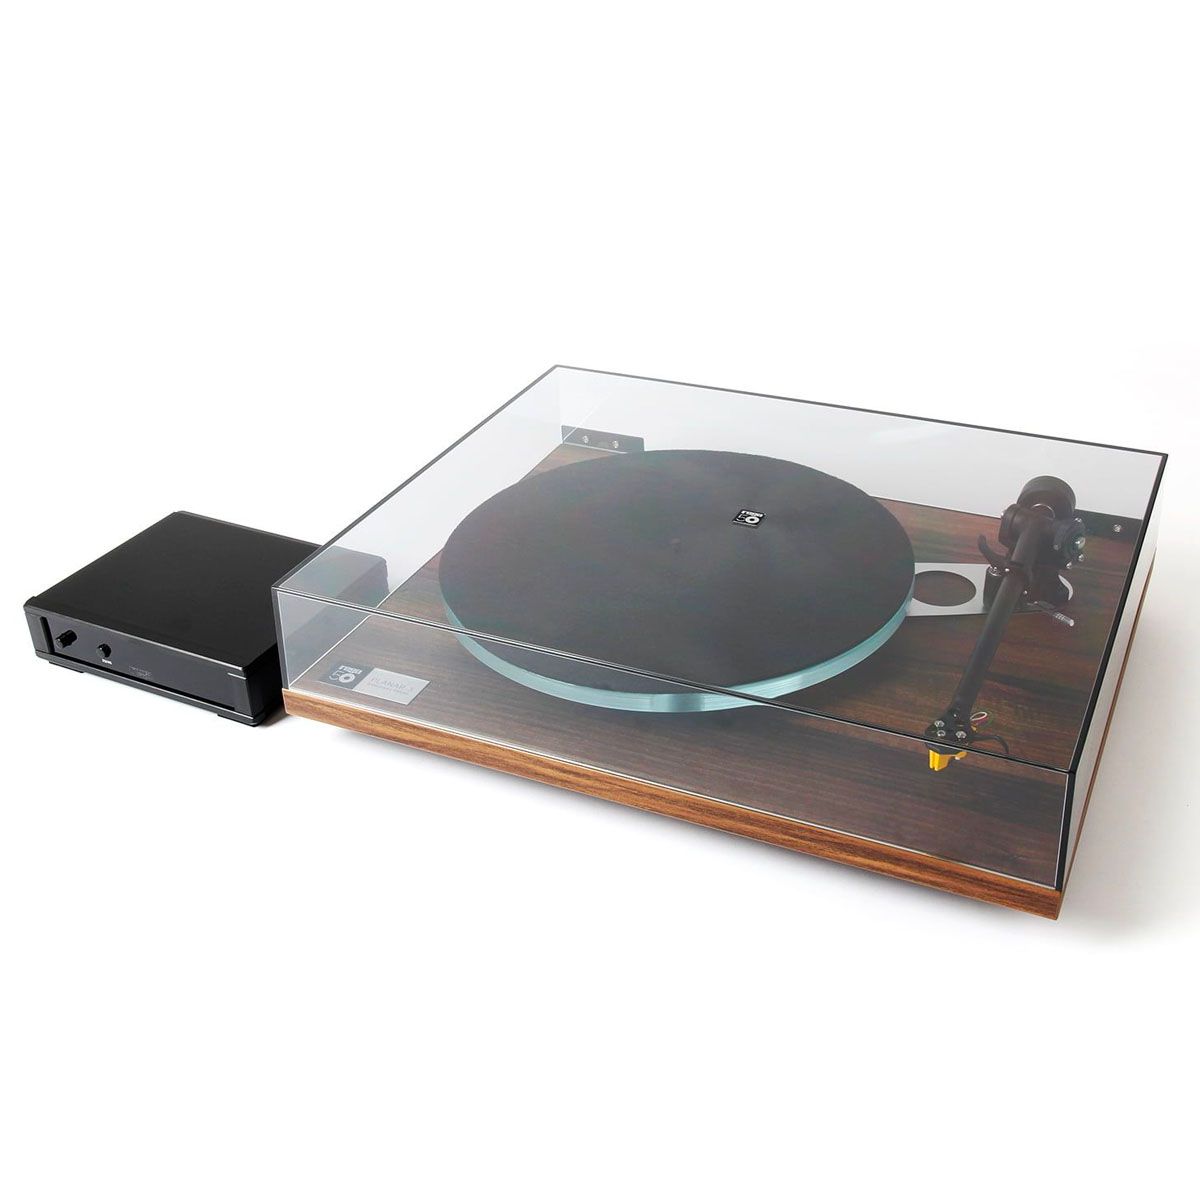 Rega Planar 3 50th Anniversary Edition Turntable - Walnut angled front view with dustcover closed and Neo PSU